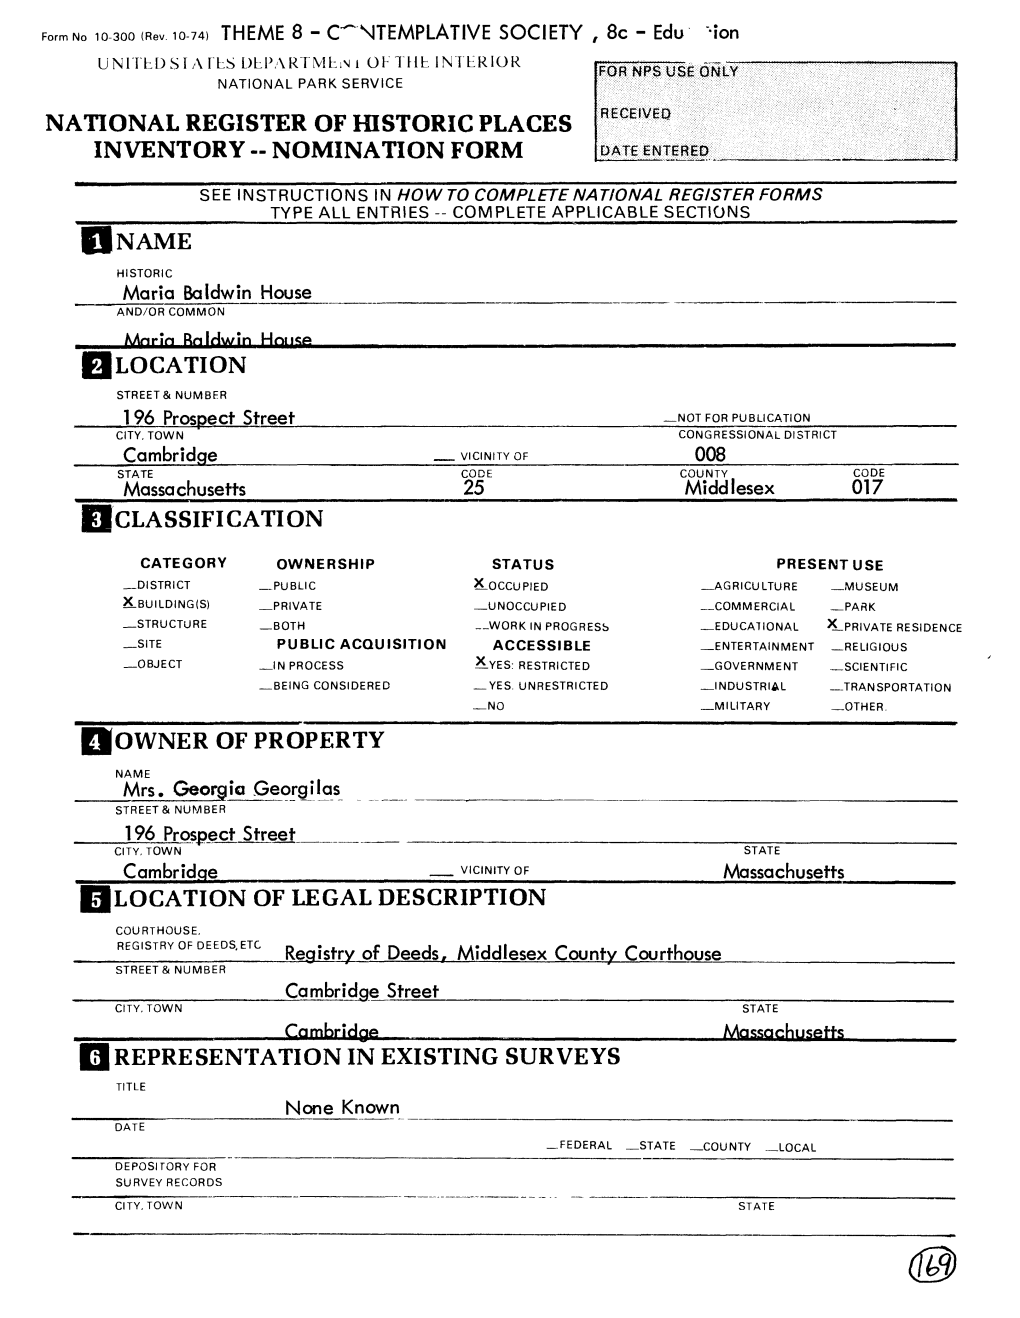 National Register of Historic Places Inventory « Nomination Form